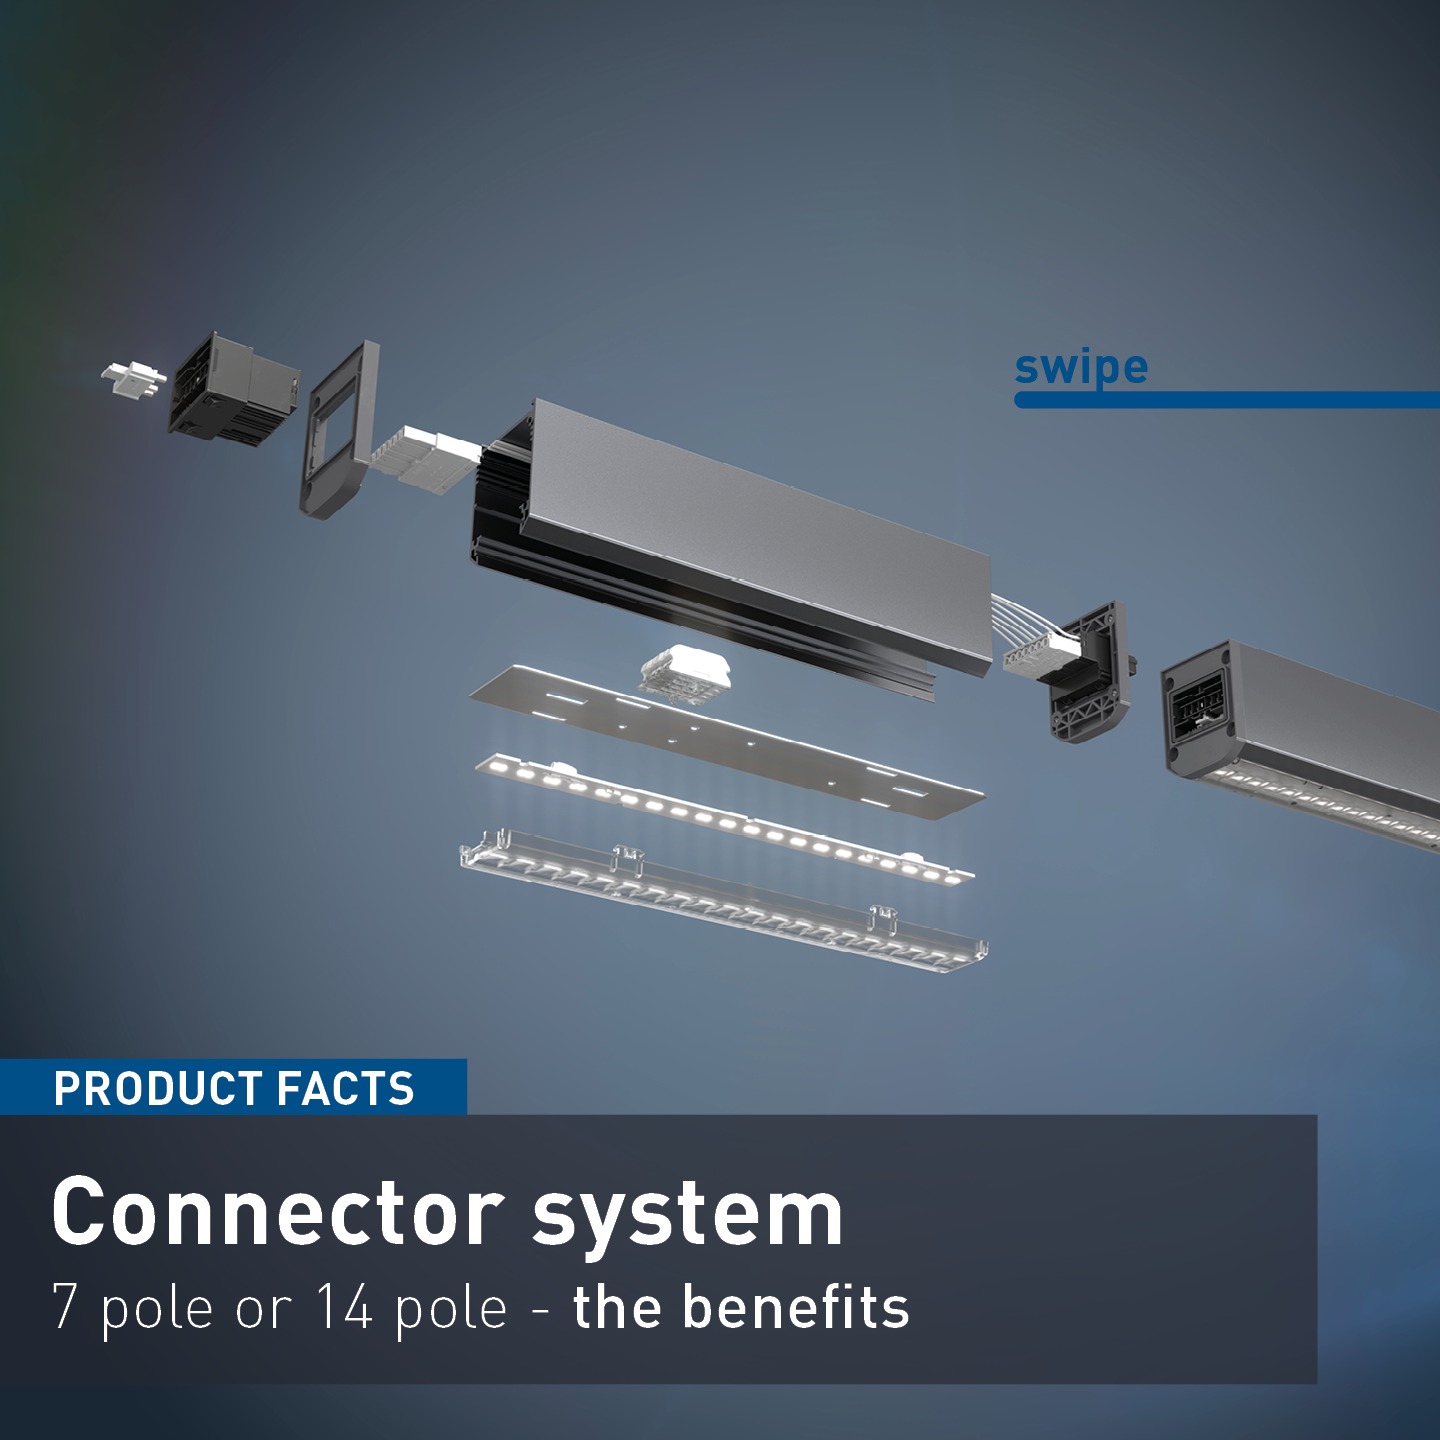 🔌🌟 New connection standard for trunking solutions! 🔌🌟
Discover our revolutionary BJB Connector System for strip lighting with 7- and 14-pole connections. 
Create innovative lighting solutions now with our BJB Connector System! 💡💫

Find more information here: https://www.bjb.com/en/light-components/connector-system/

#BJB #ConnectorSystem #Beleuchtung #Innovation #Lichtdesign #Montage #Automatisierung #Elektrik #PlugAndPlay #Beleuchtungstechnik #trunkingsolutions #trunkingsystem #lichtbandverbindersystem